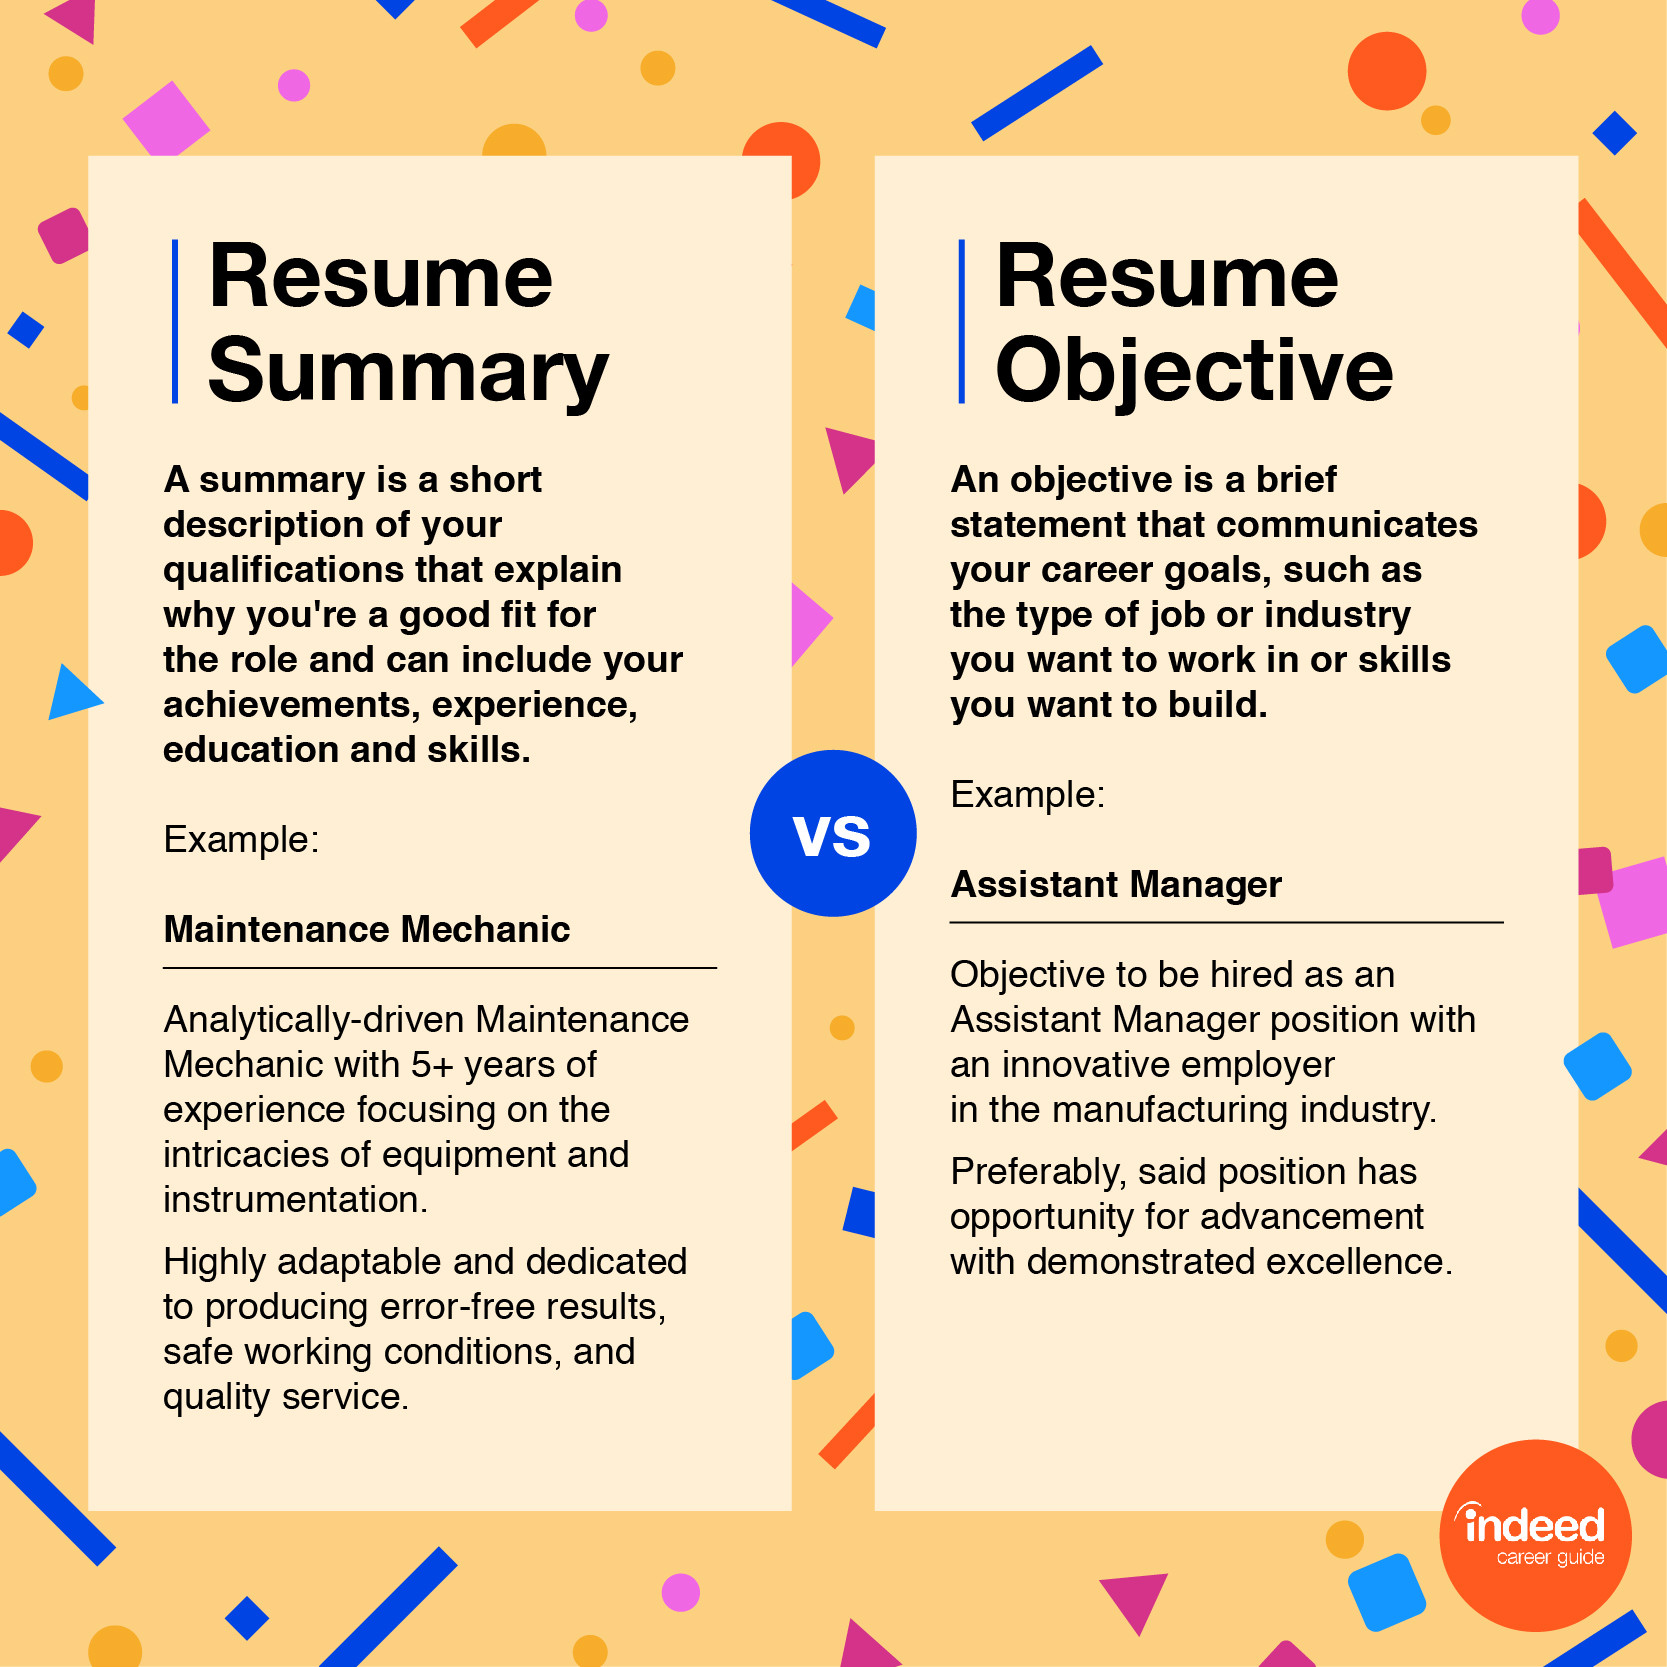 General Objective Statement for Resume Samples 70lancarrezekiq Resume Objective Examples (with Tips and How-to Guide …